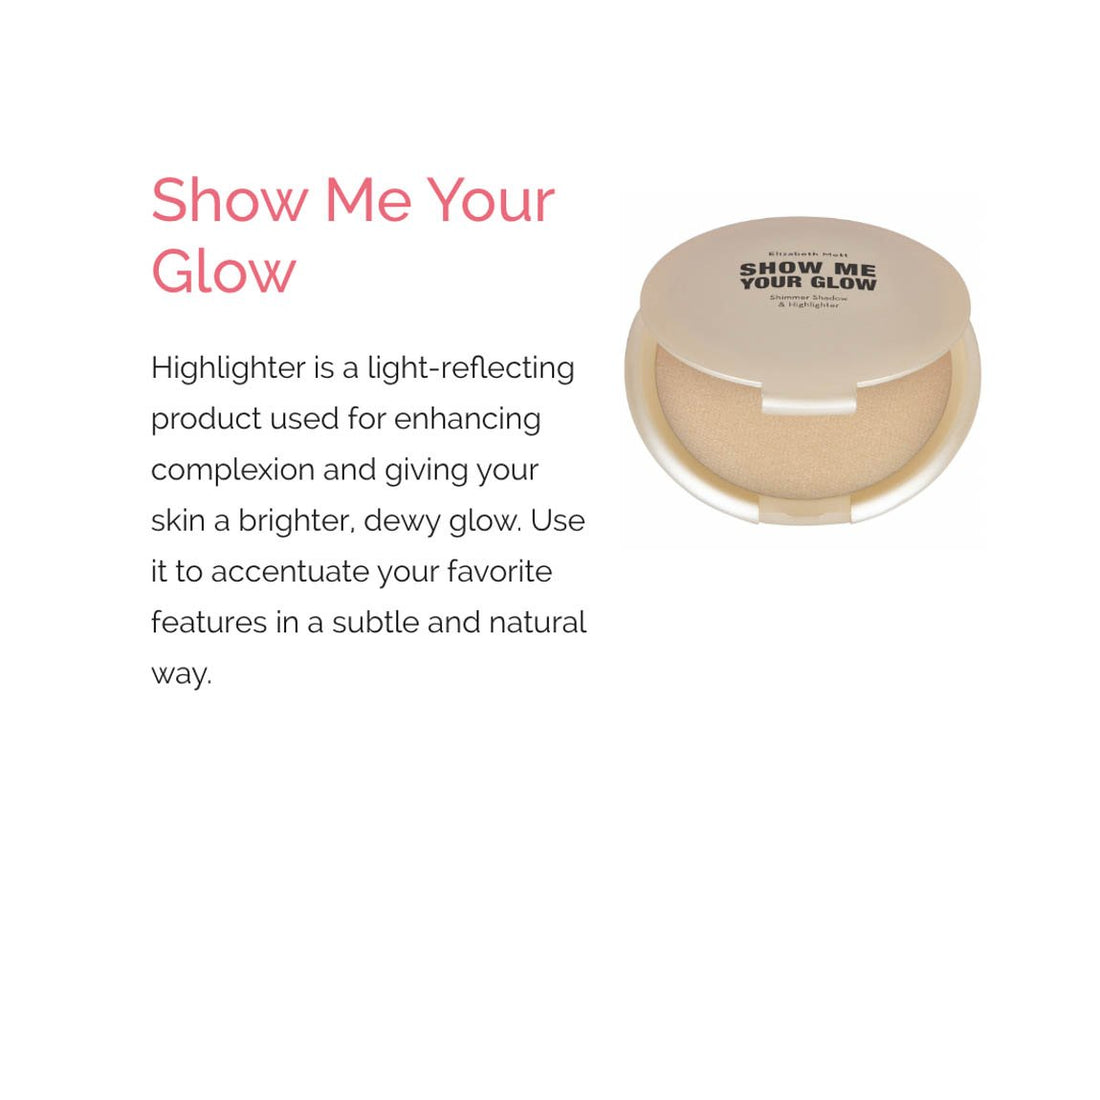 show me your glow highlighter and shimmer powder